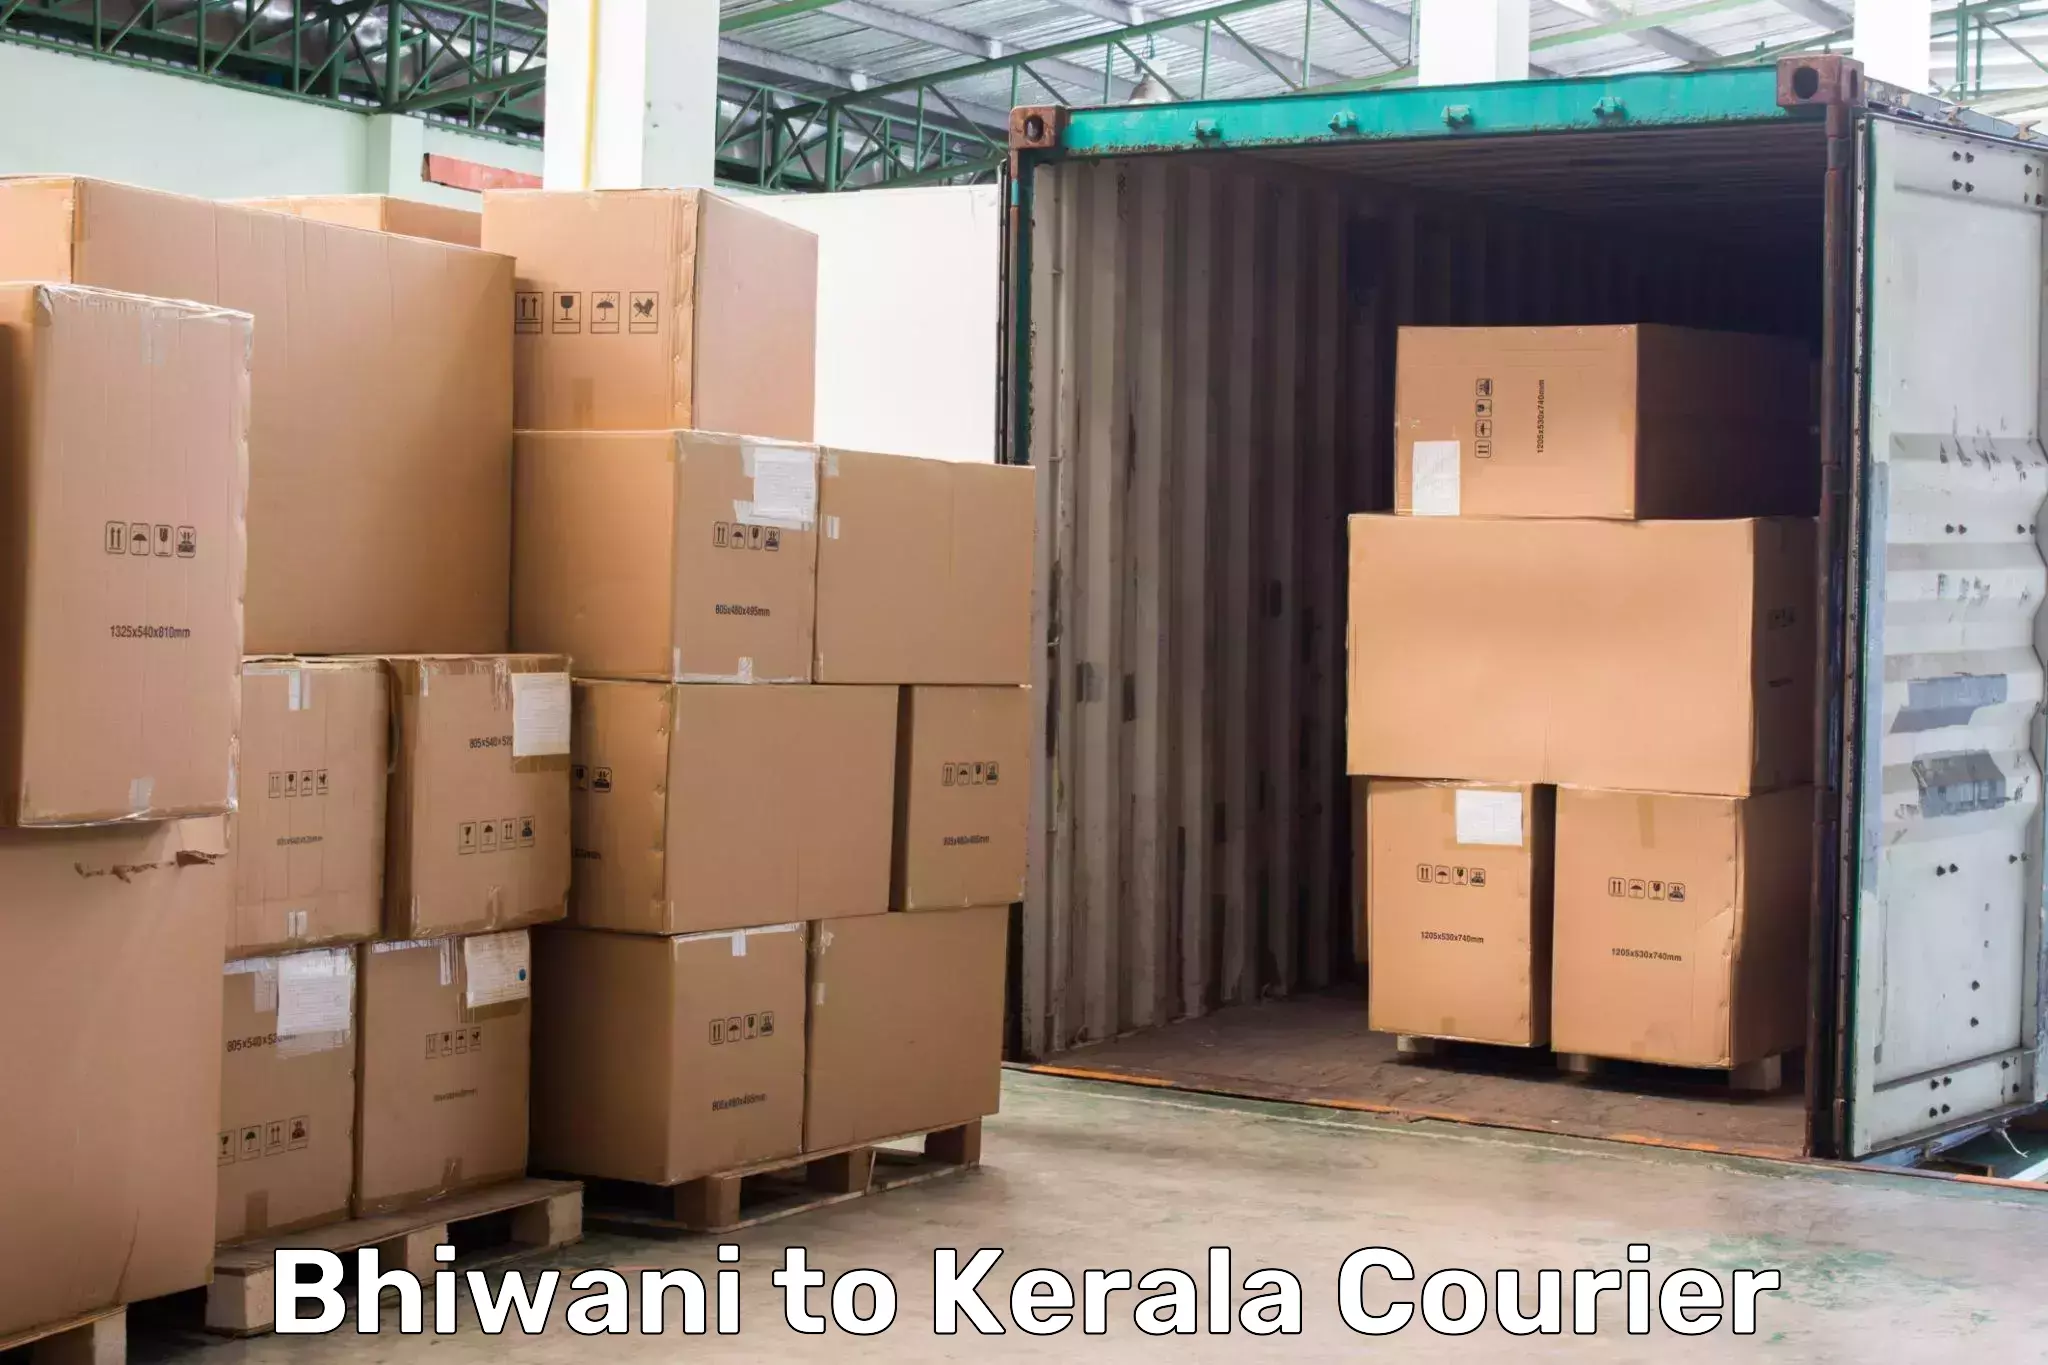 Flexible delivery scheduling Bhiwani to Kerala